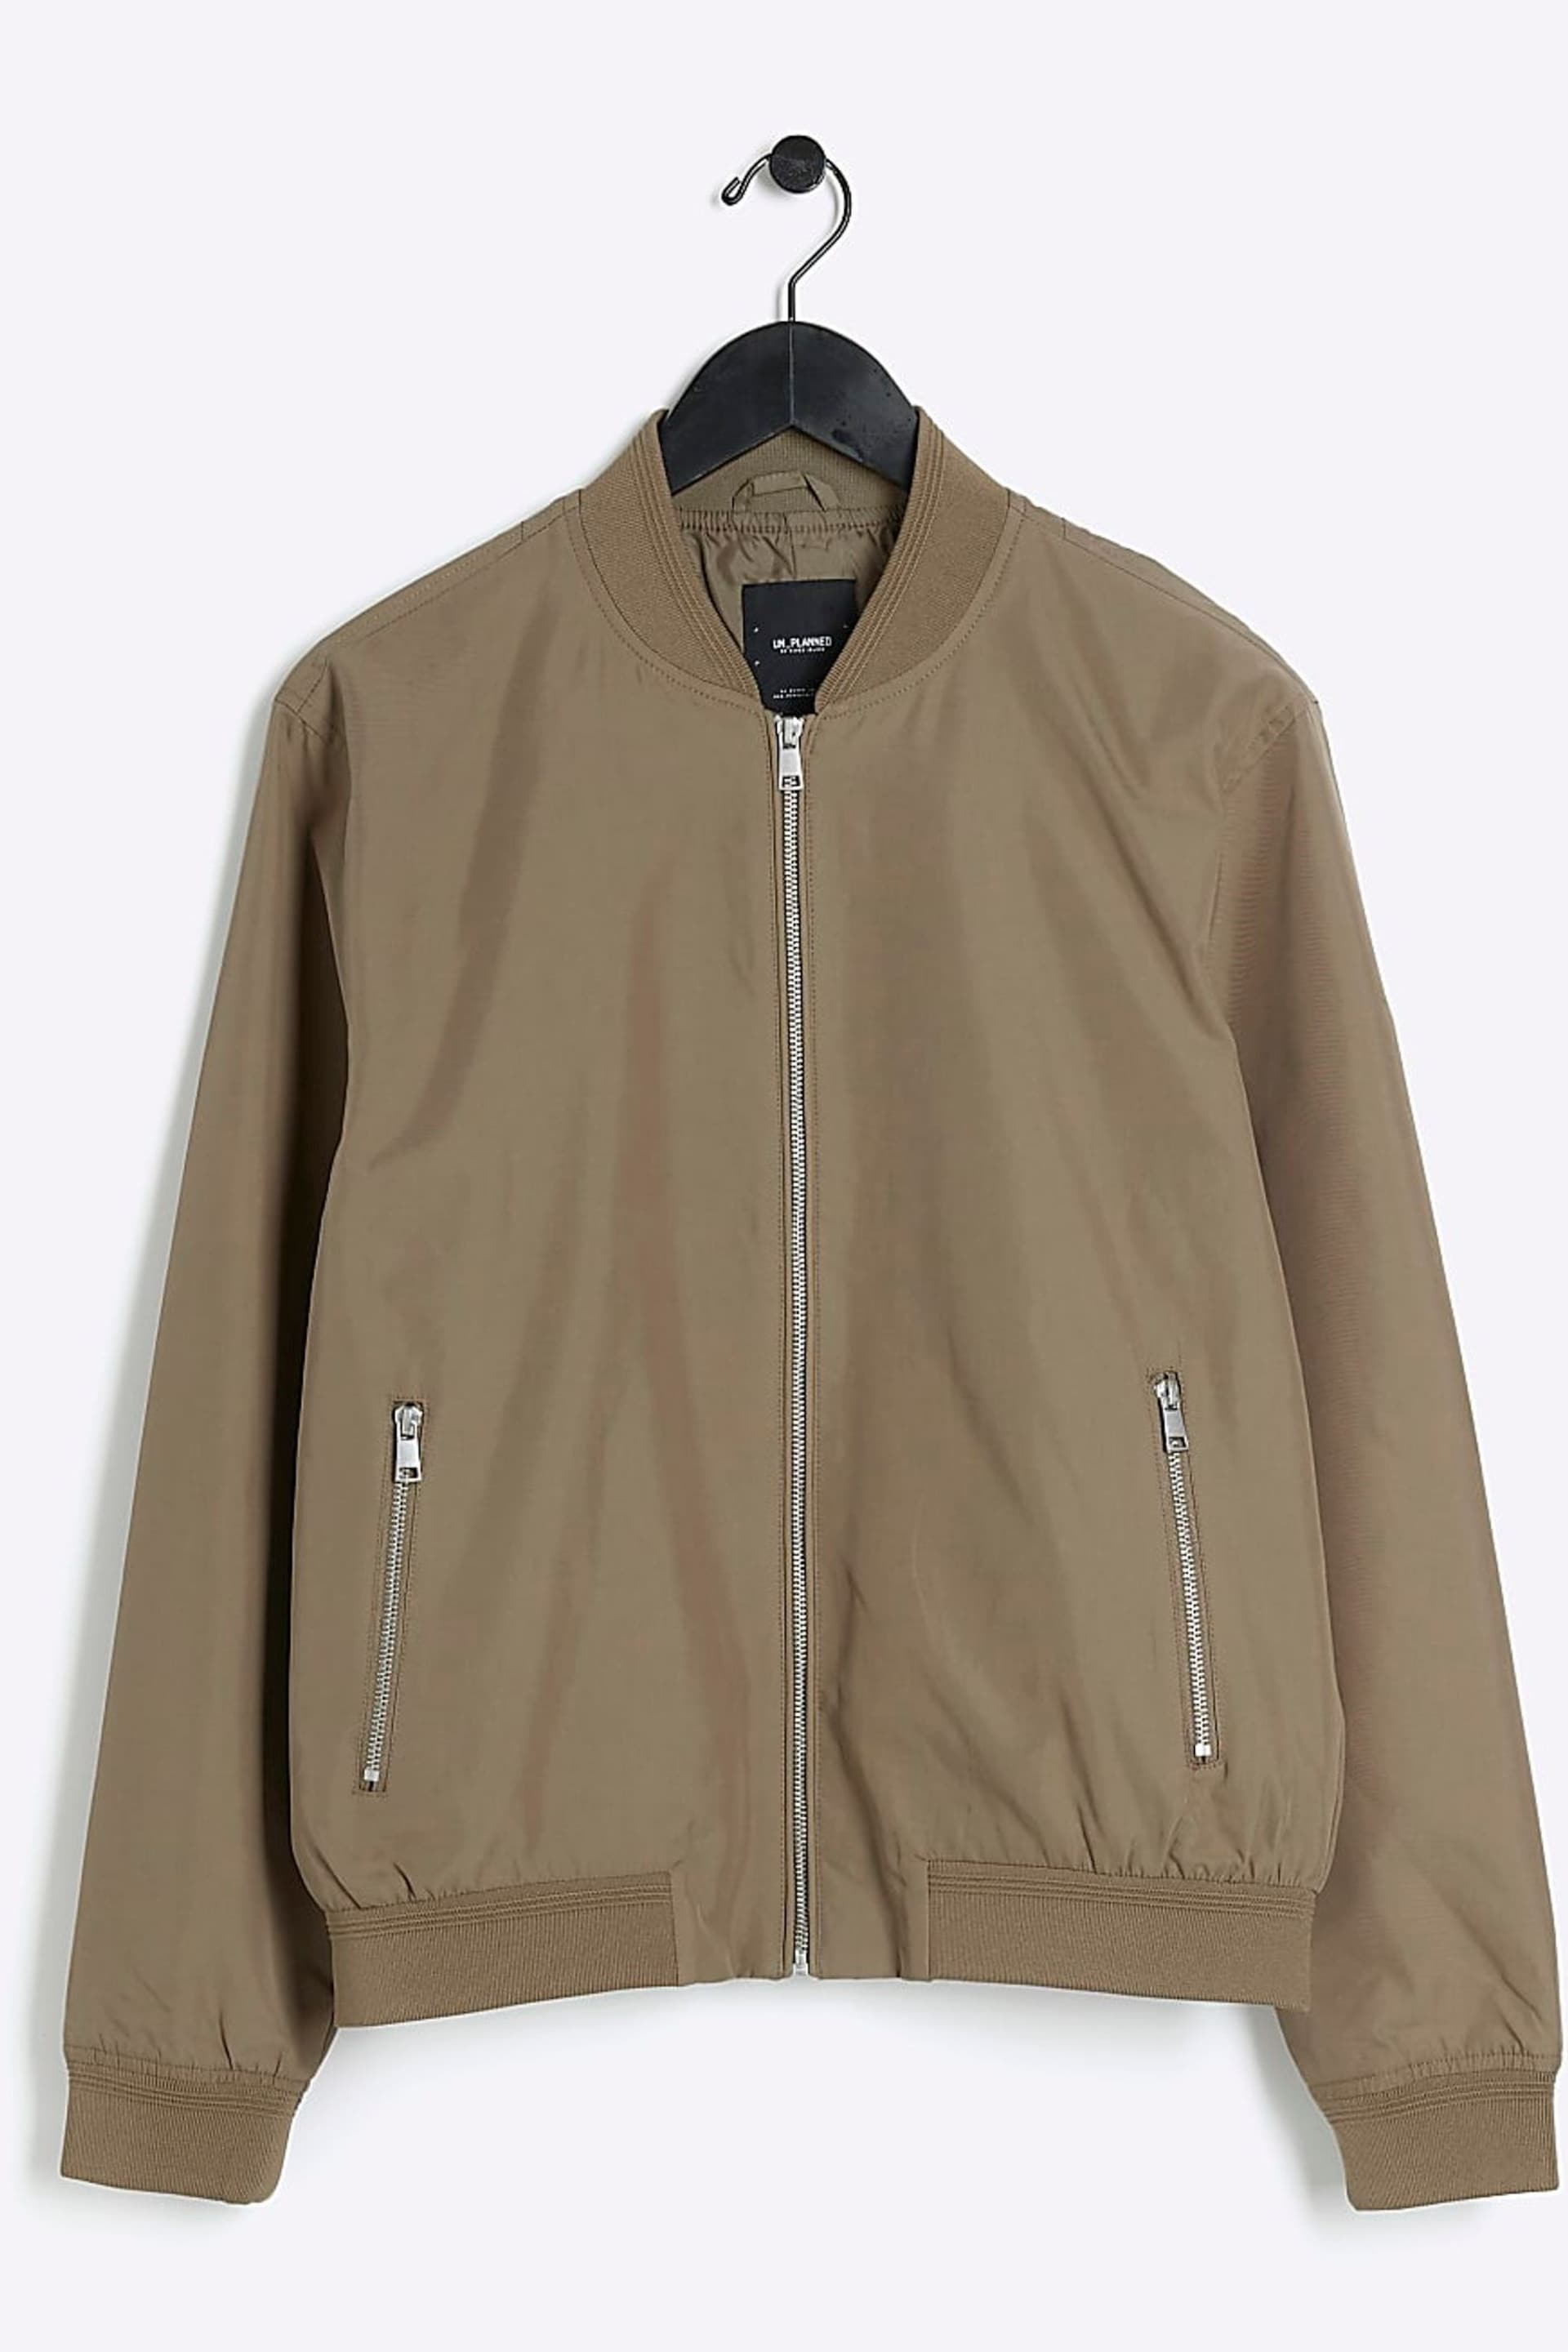 River Island Brown Cotton Bomber Jacket - Image 5 of 8